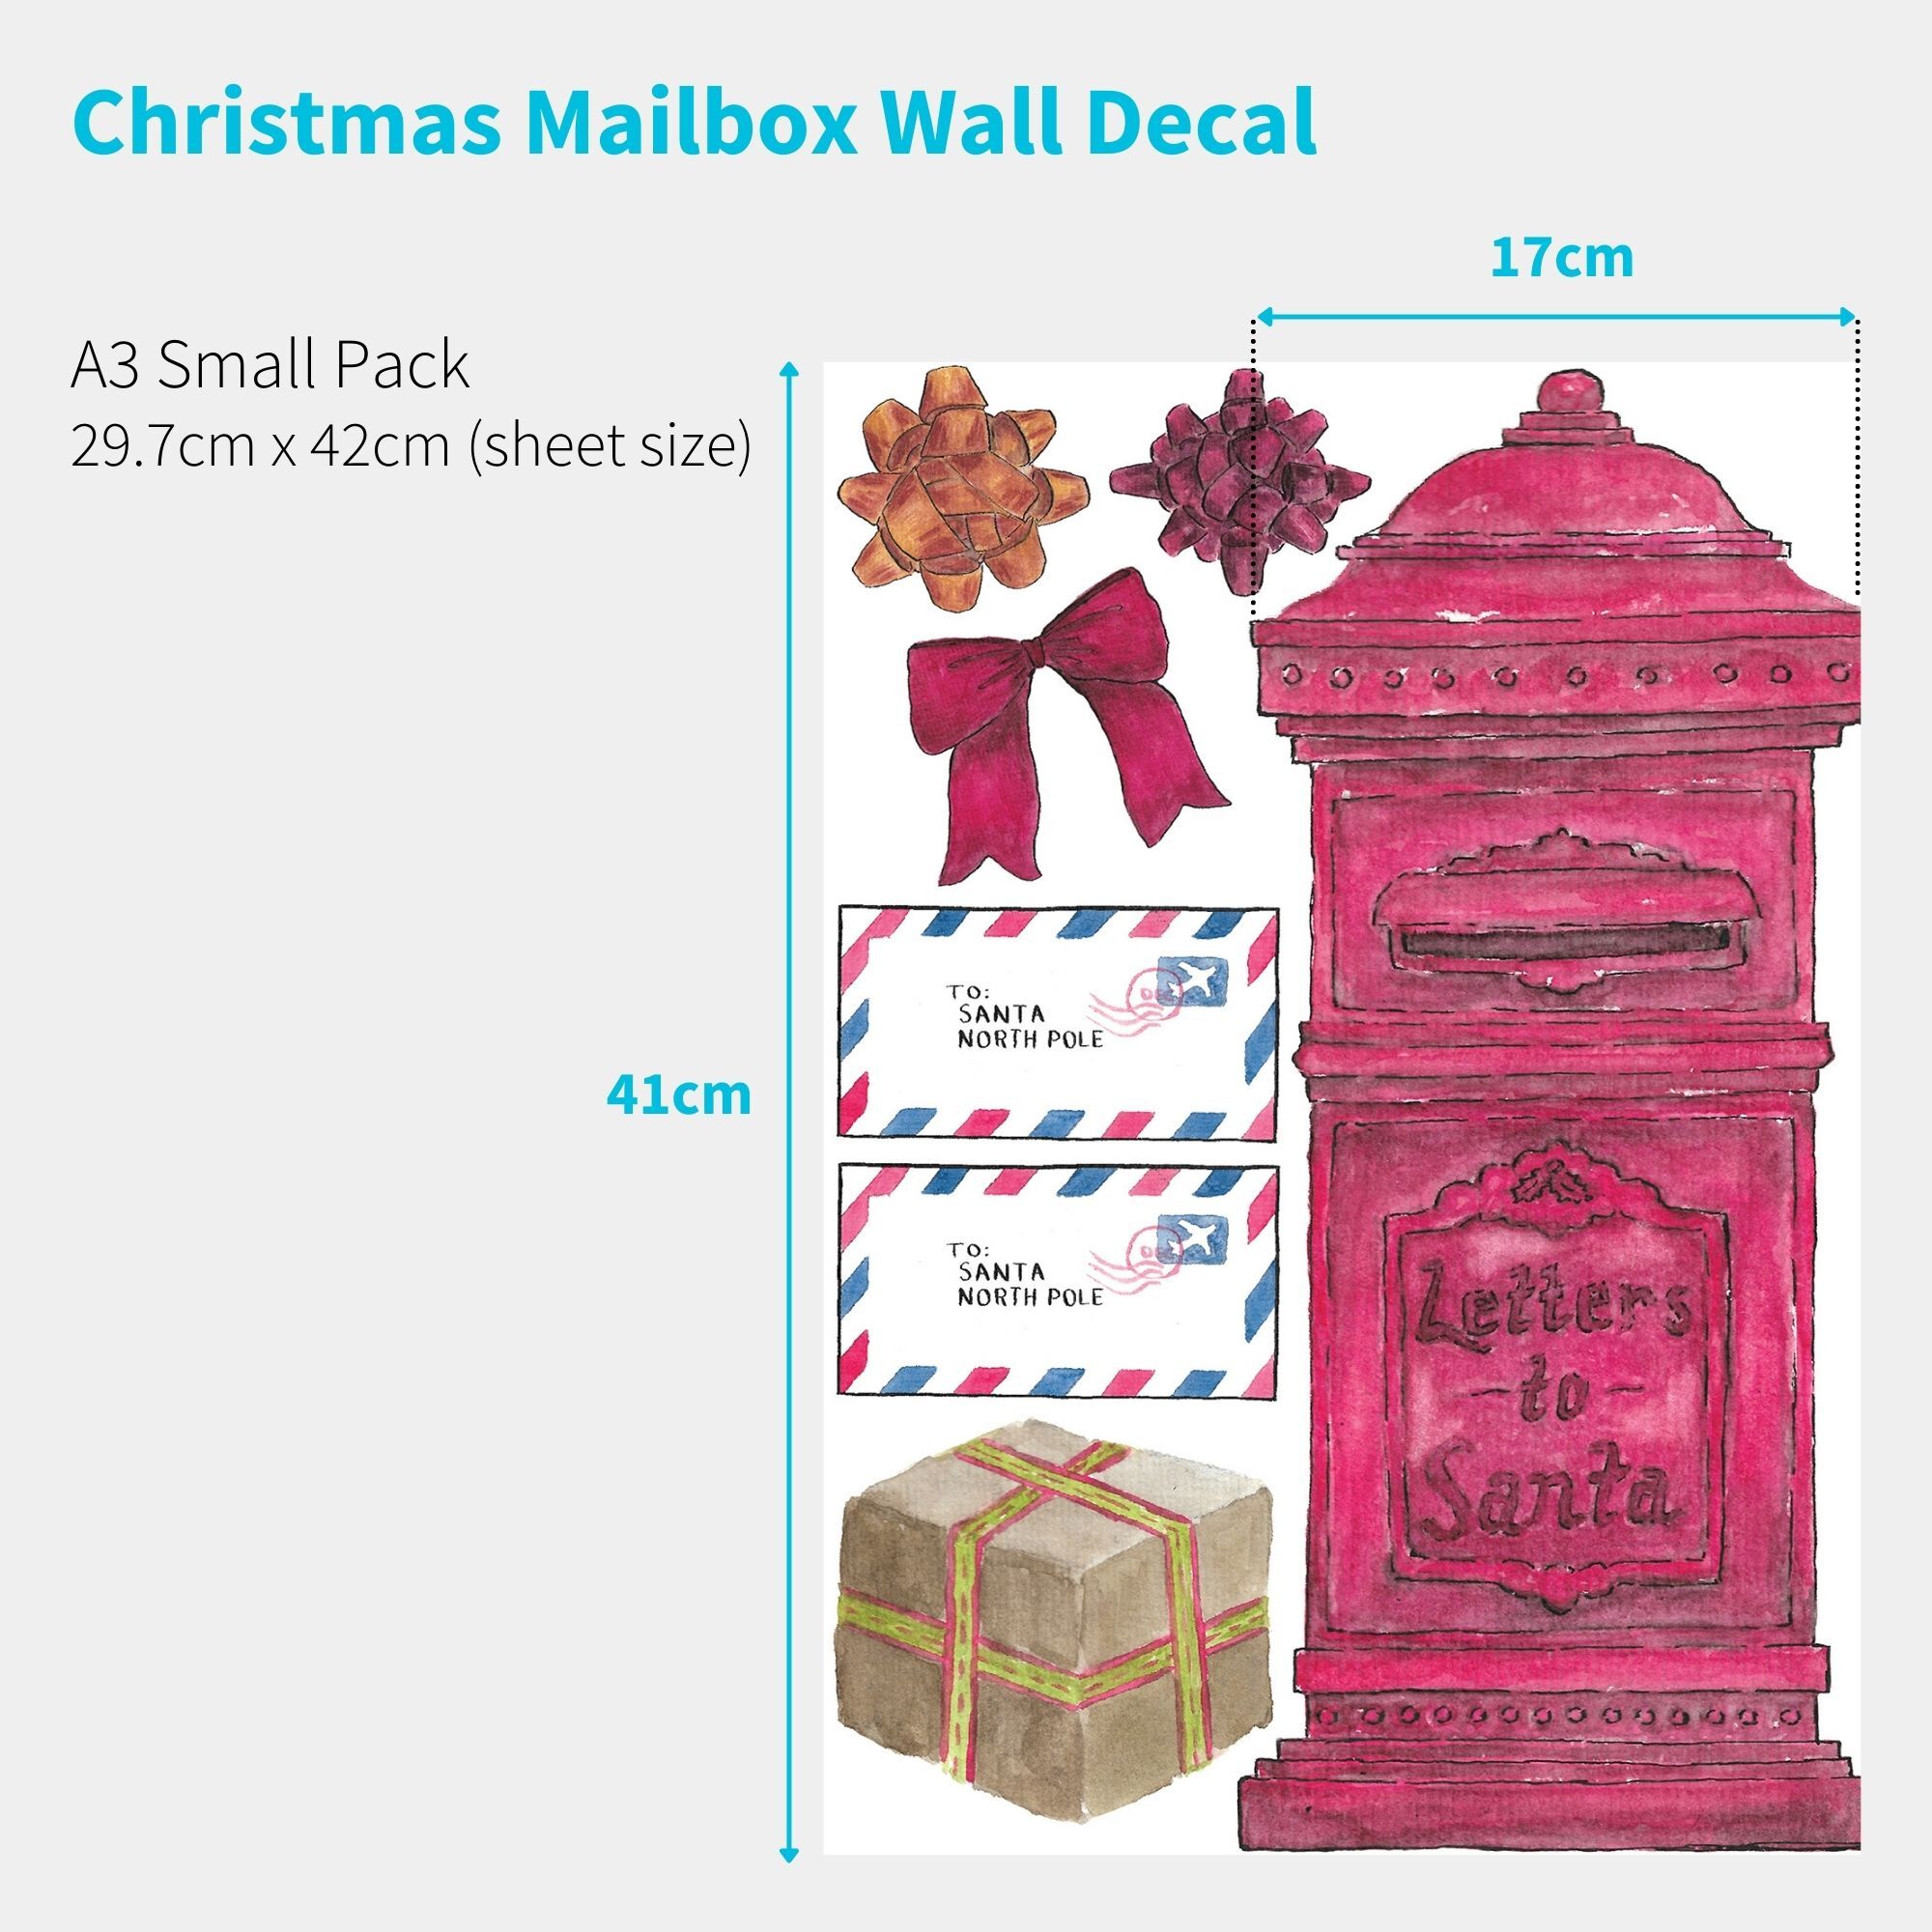 WD-Mailbox - A - A3 Small pack